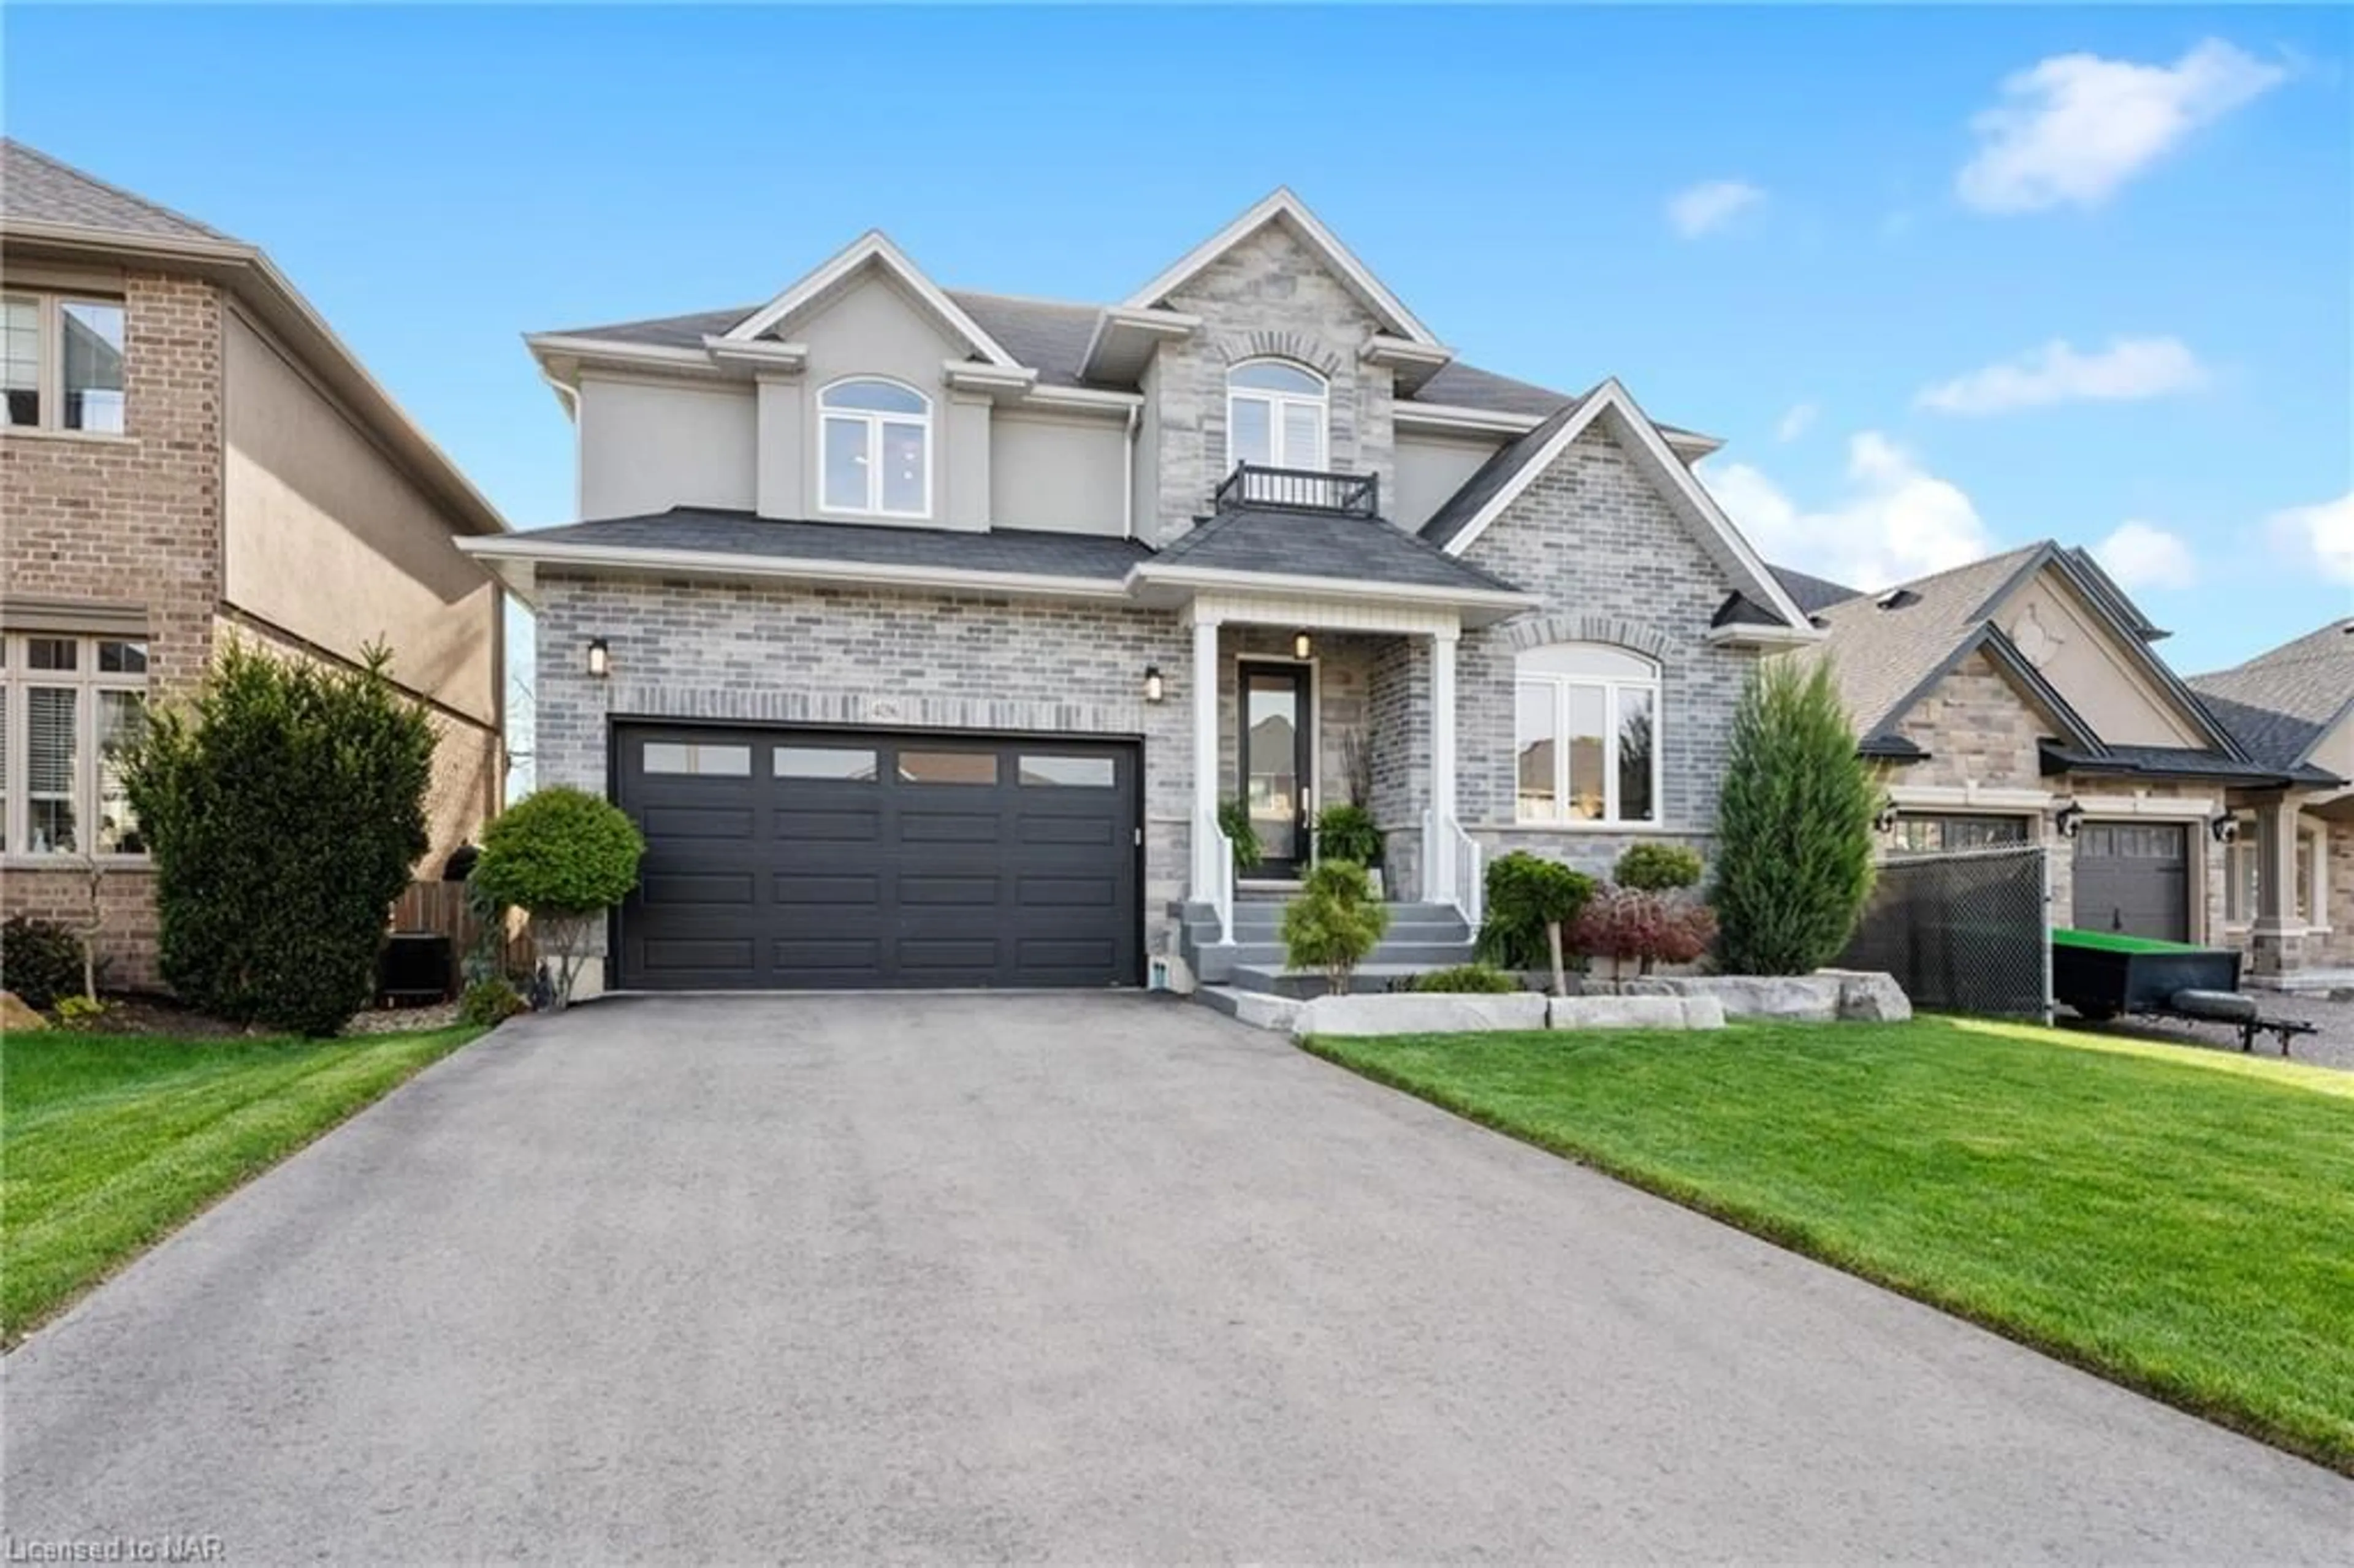 Frontside or backside of a home for 4096 Highland Park Dr, Beamsville Ontario L0R 1B7